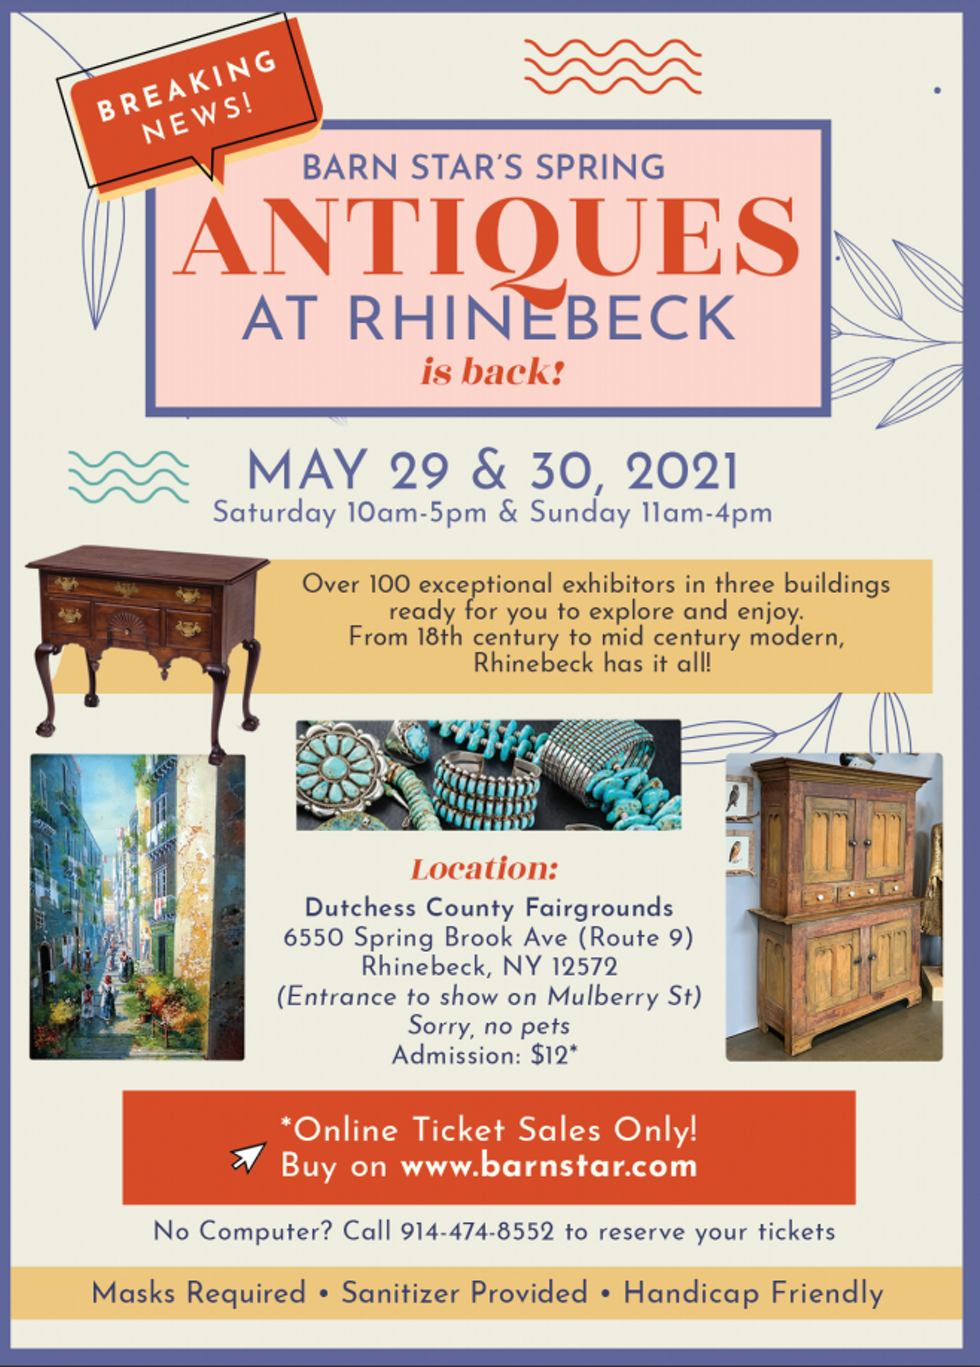 Barn Star's Spring Antiques at Rhinebeck is back and better than ever!